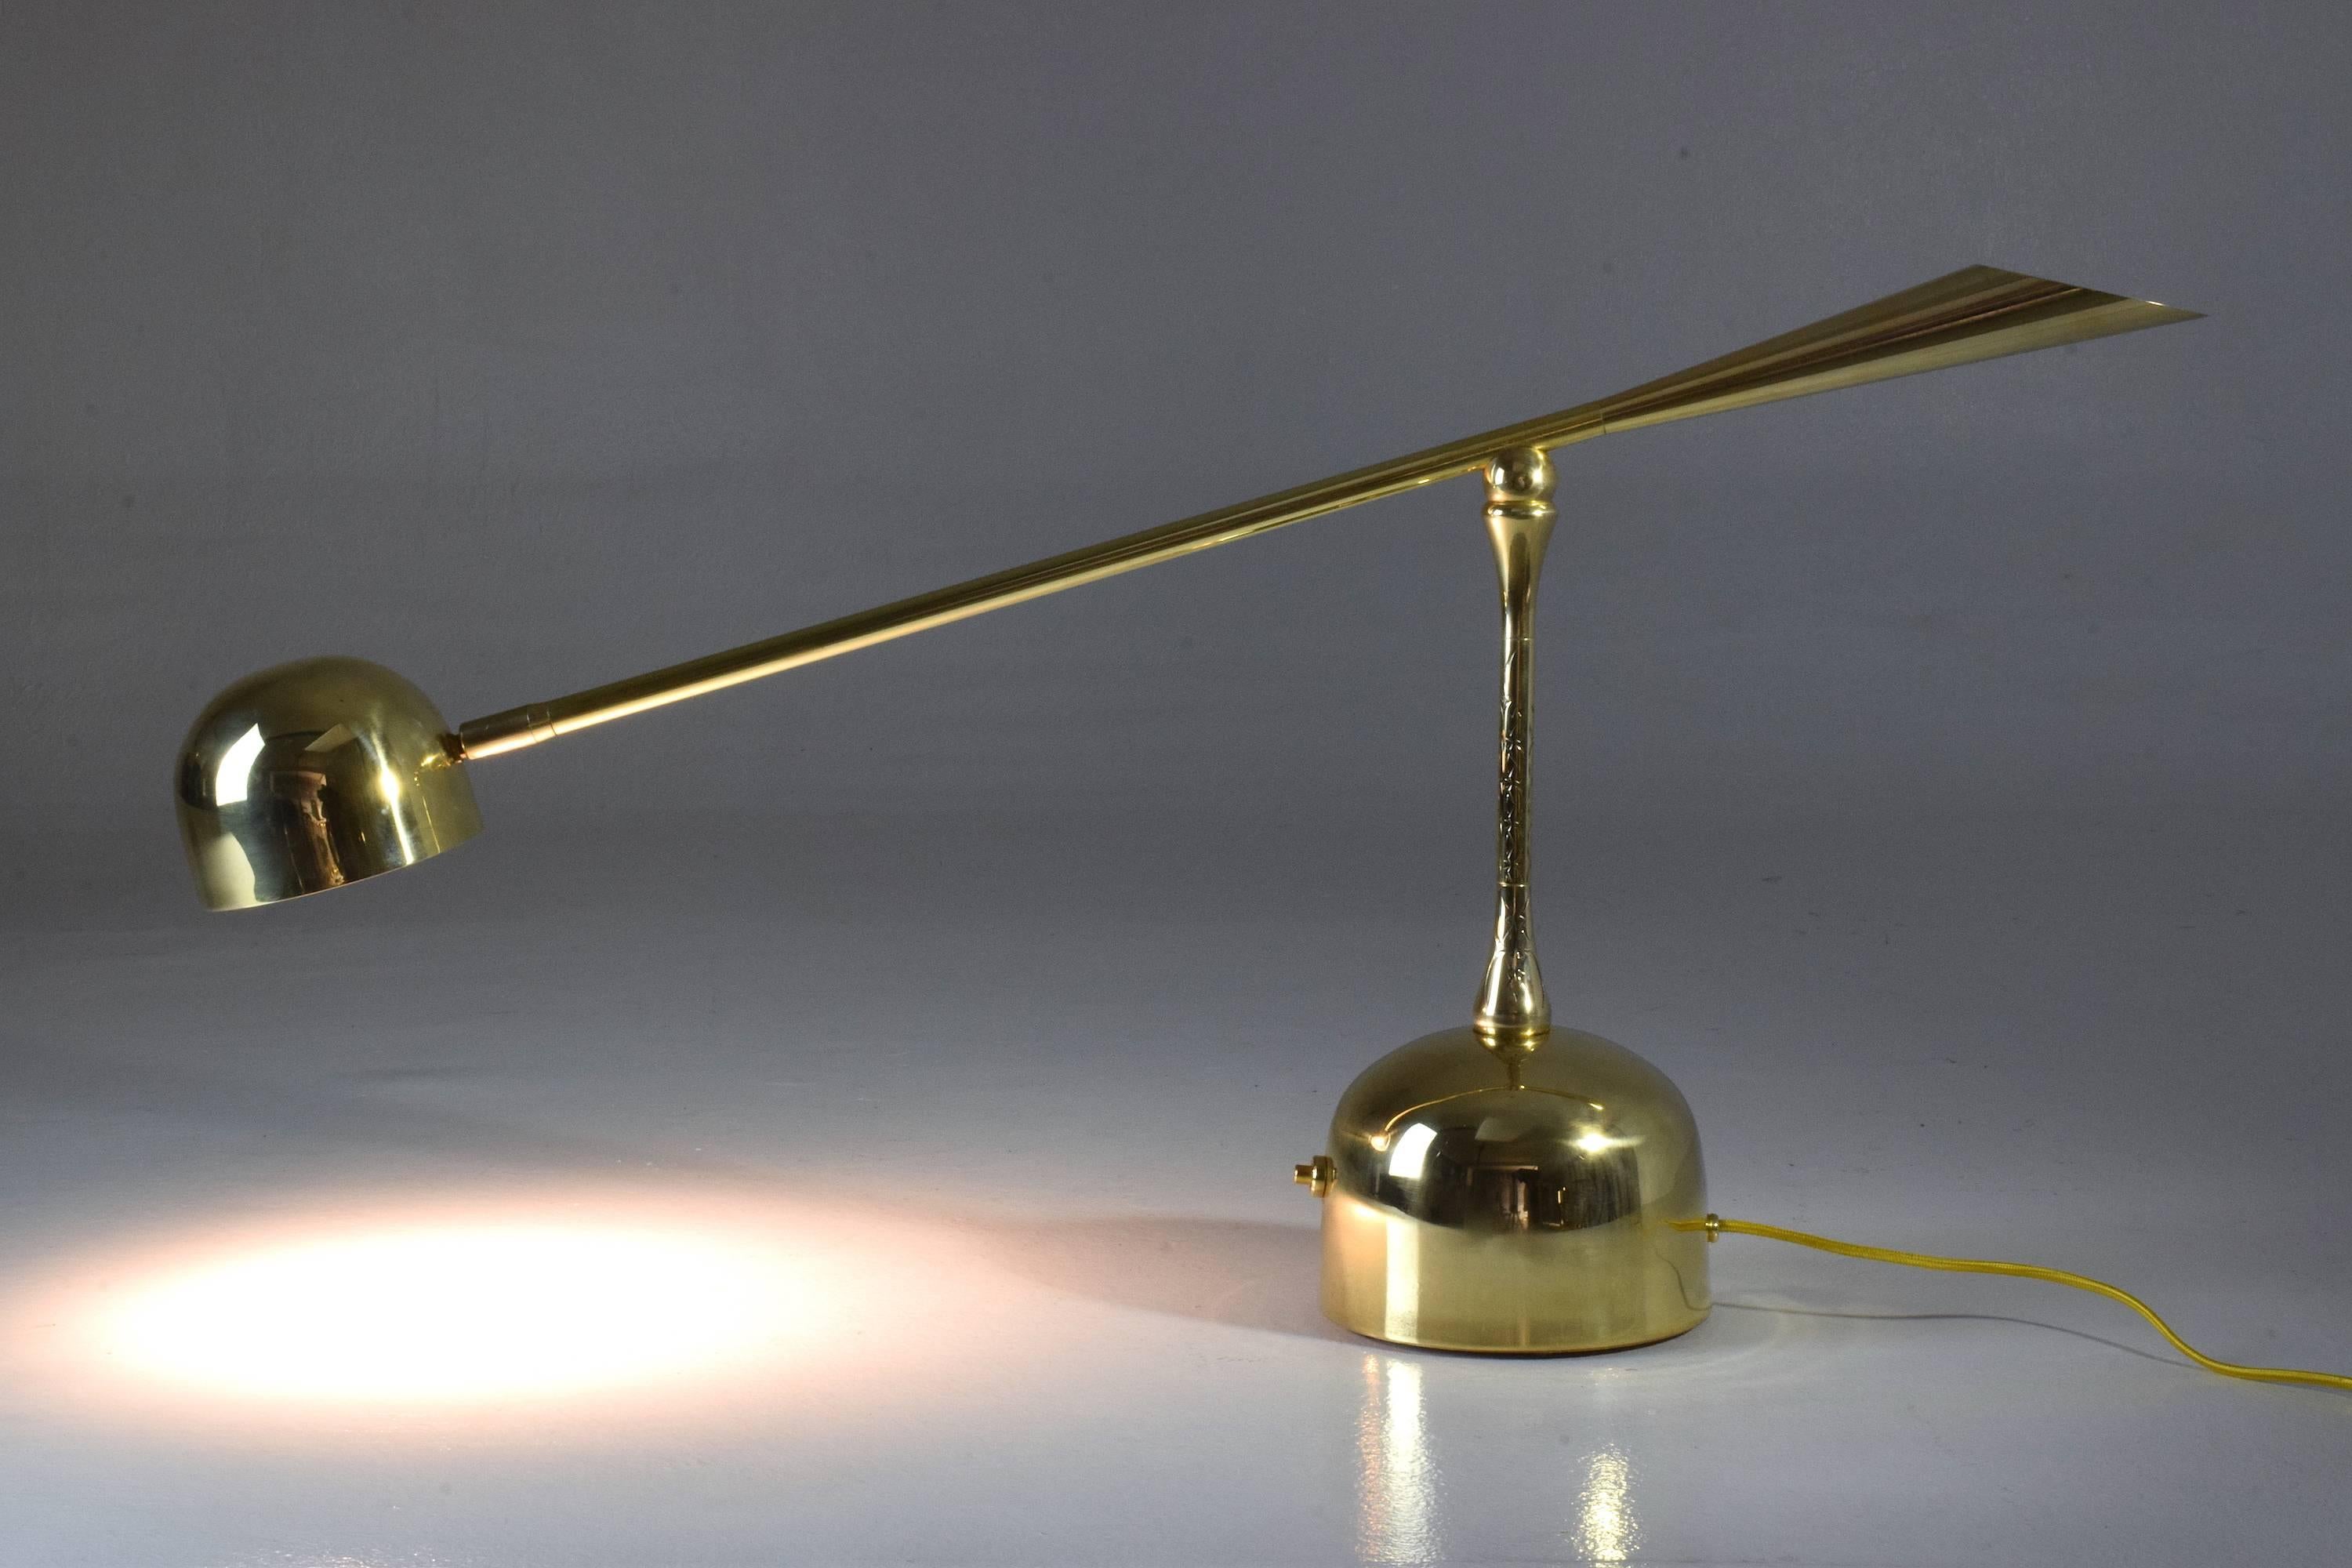 Nickel Continuum-II Contemporary Articulating Brass Table Lamp, Flow Collection